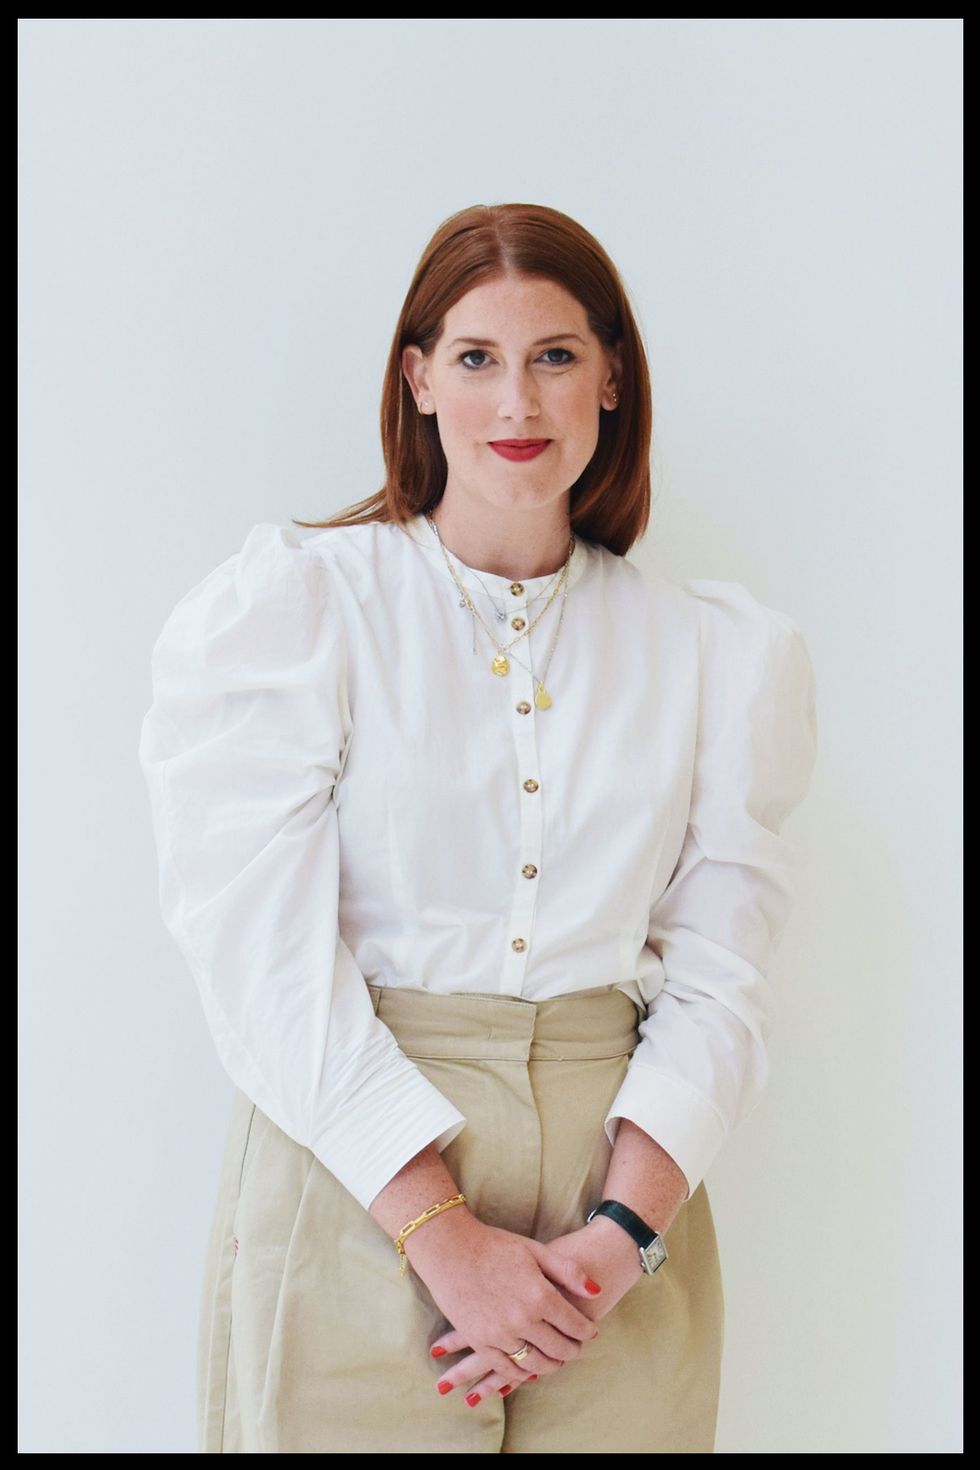 katie bellman from nordstrom stands in front of a white wall wearing a blouse and khakis to illustrate her style resolution for 2022